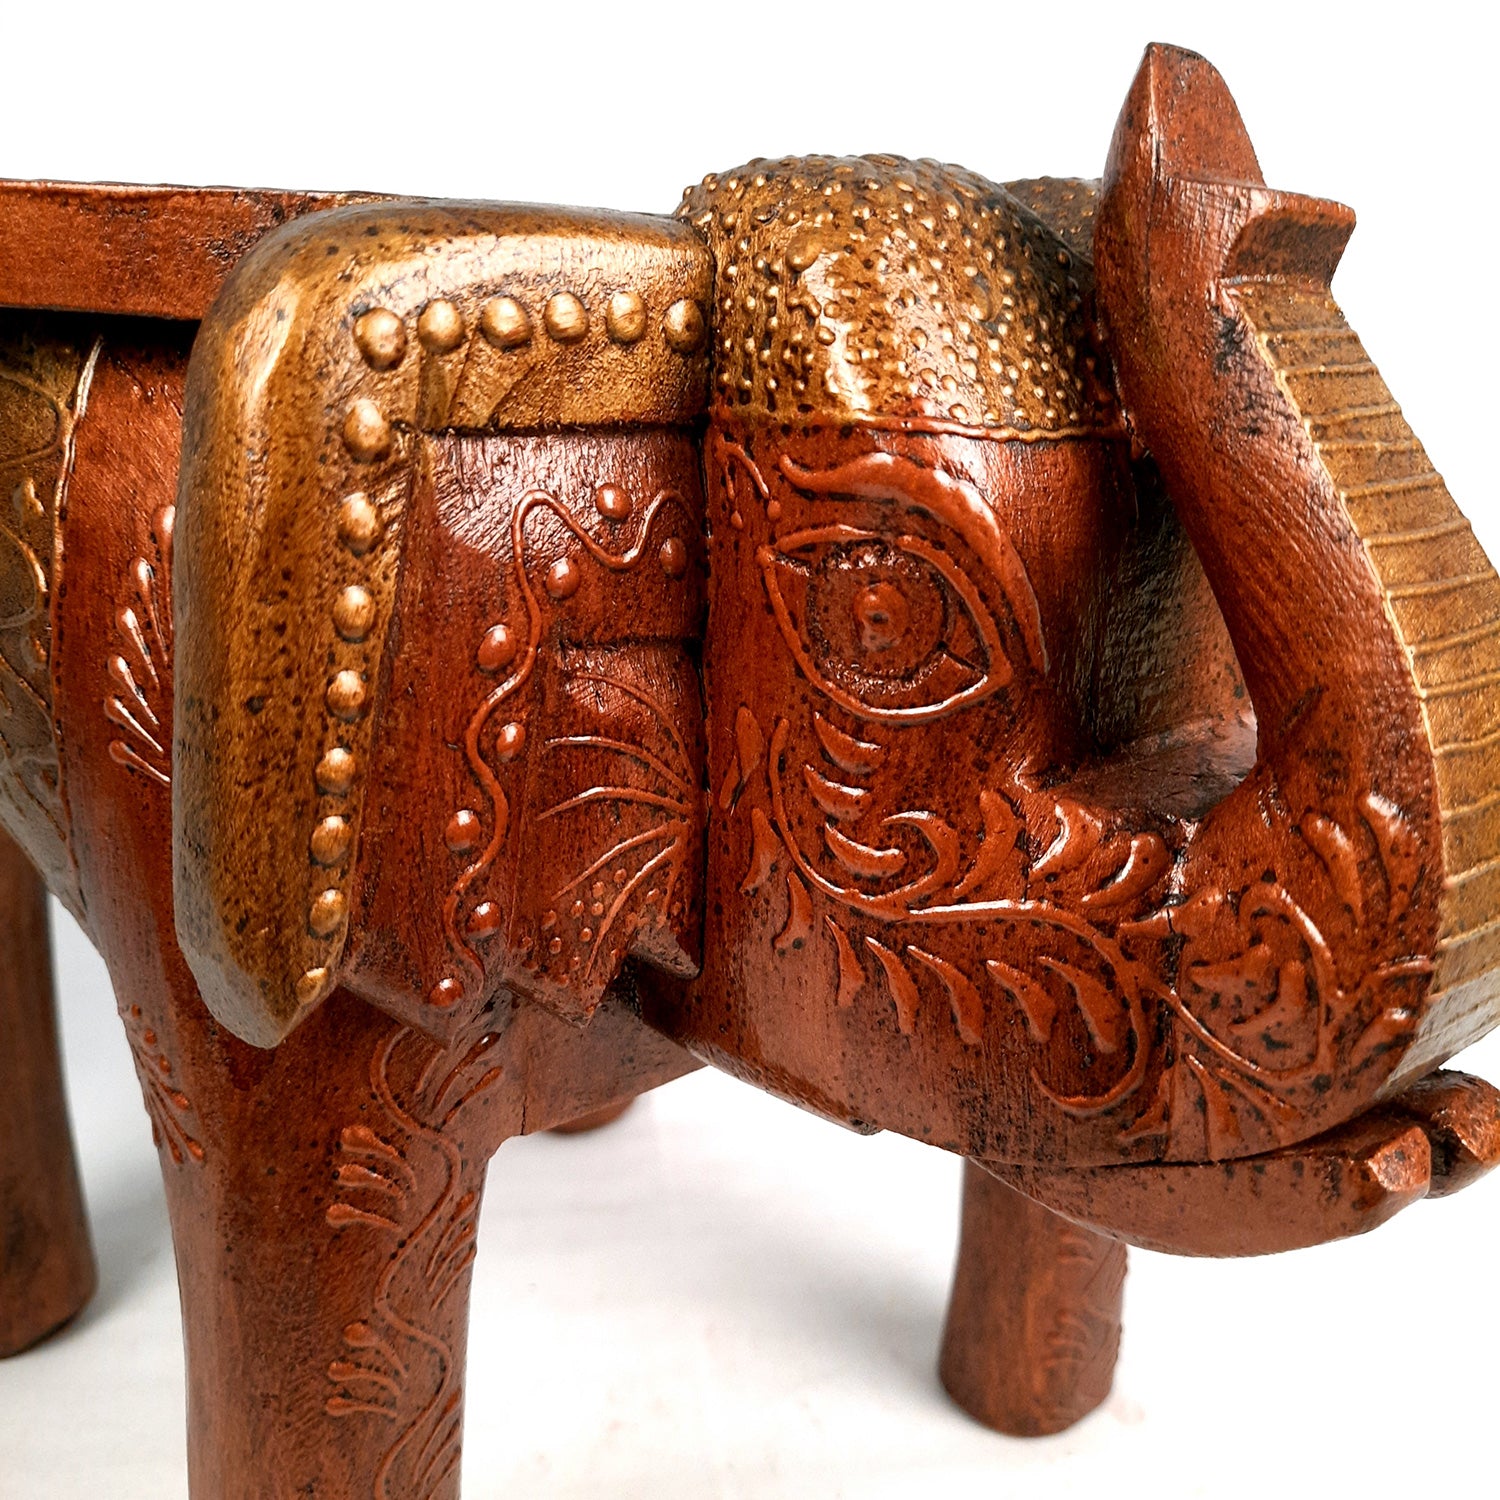 Side Table Cum Stool - Elephant Design | Wooden Stools for Keeping Lamp, Vases & Plants - for Home Decor, Corners, Sofa Side Stool, Office & Gifts - 12 Inch - Apkamart